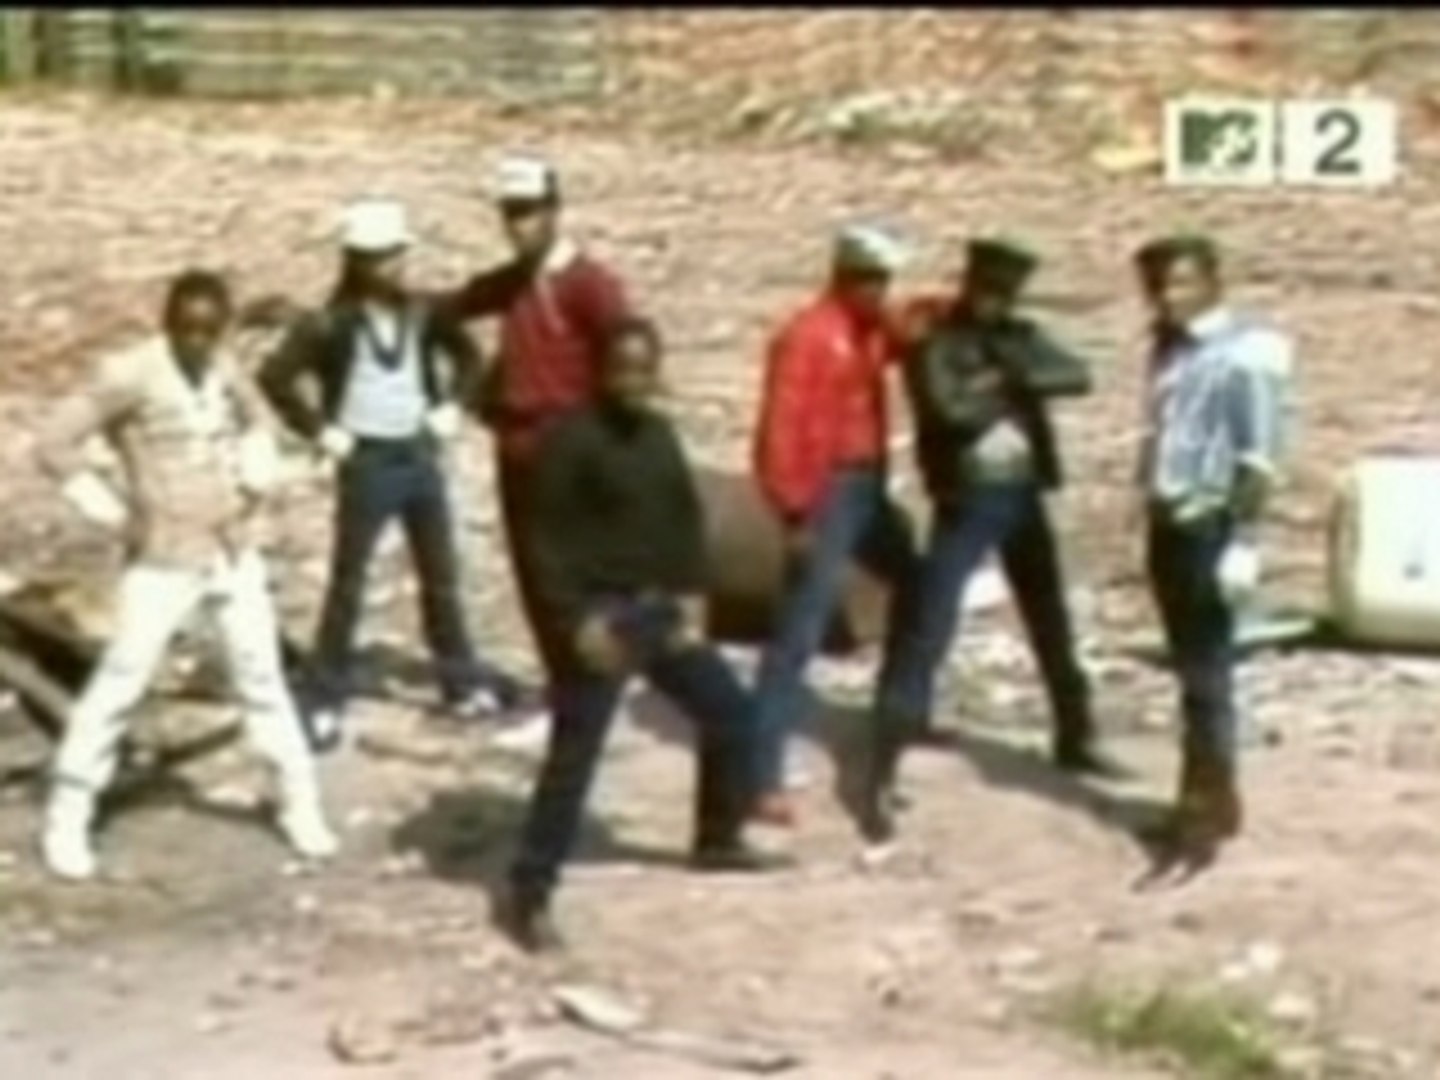 Grandmaster Flash and the Furious Five: The Message (Music Video